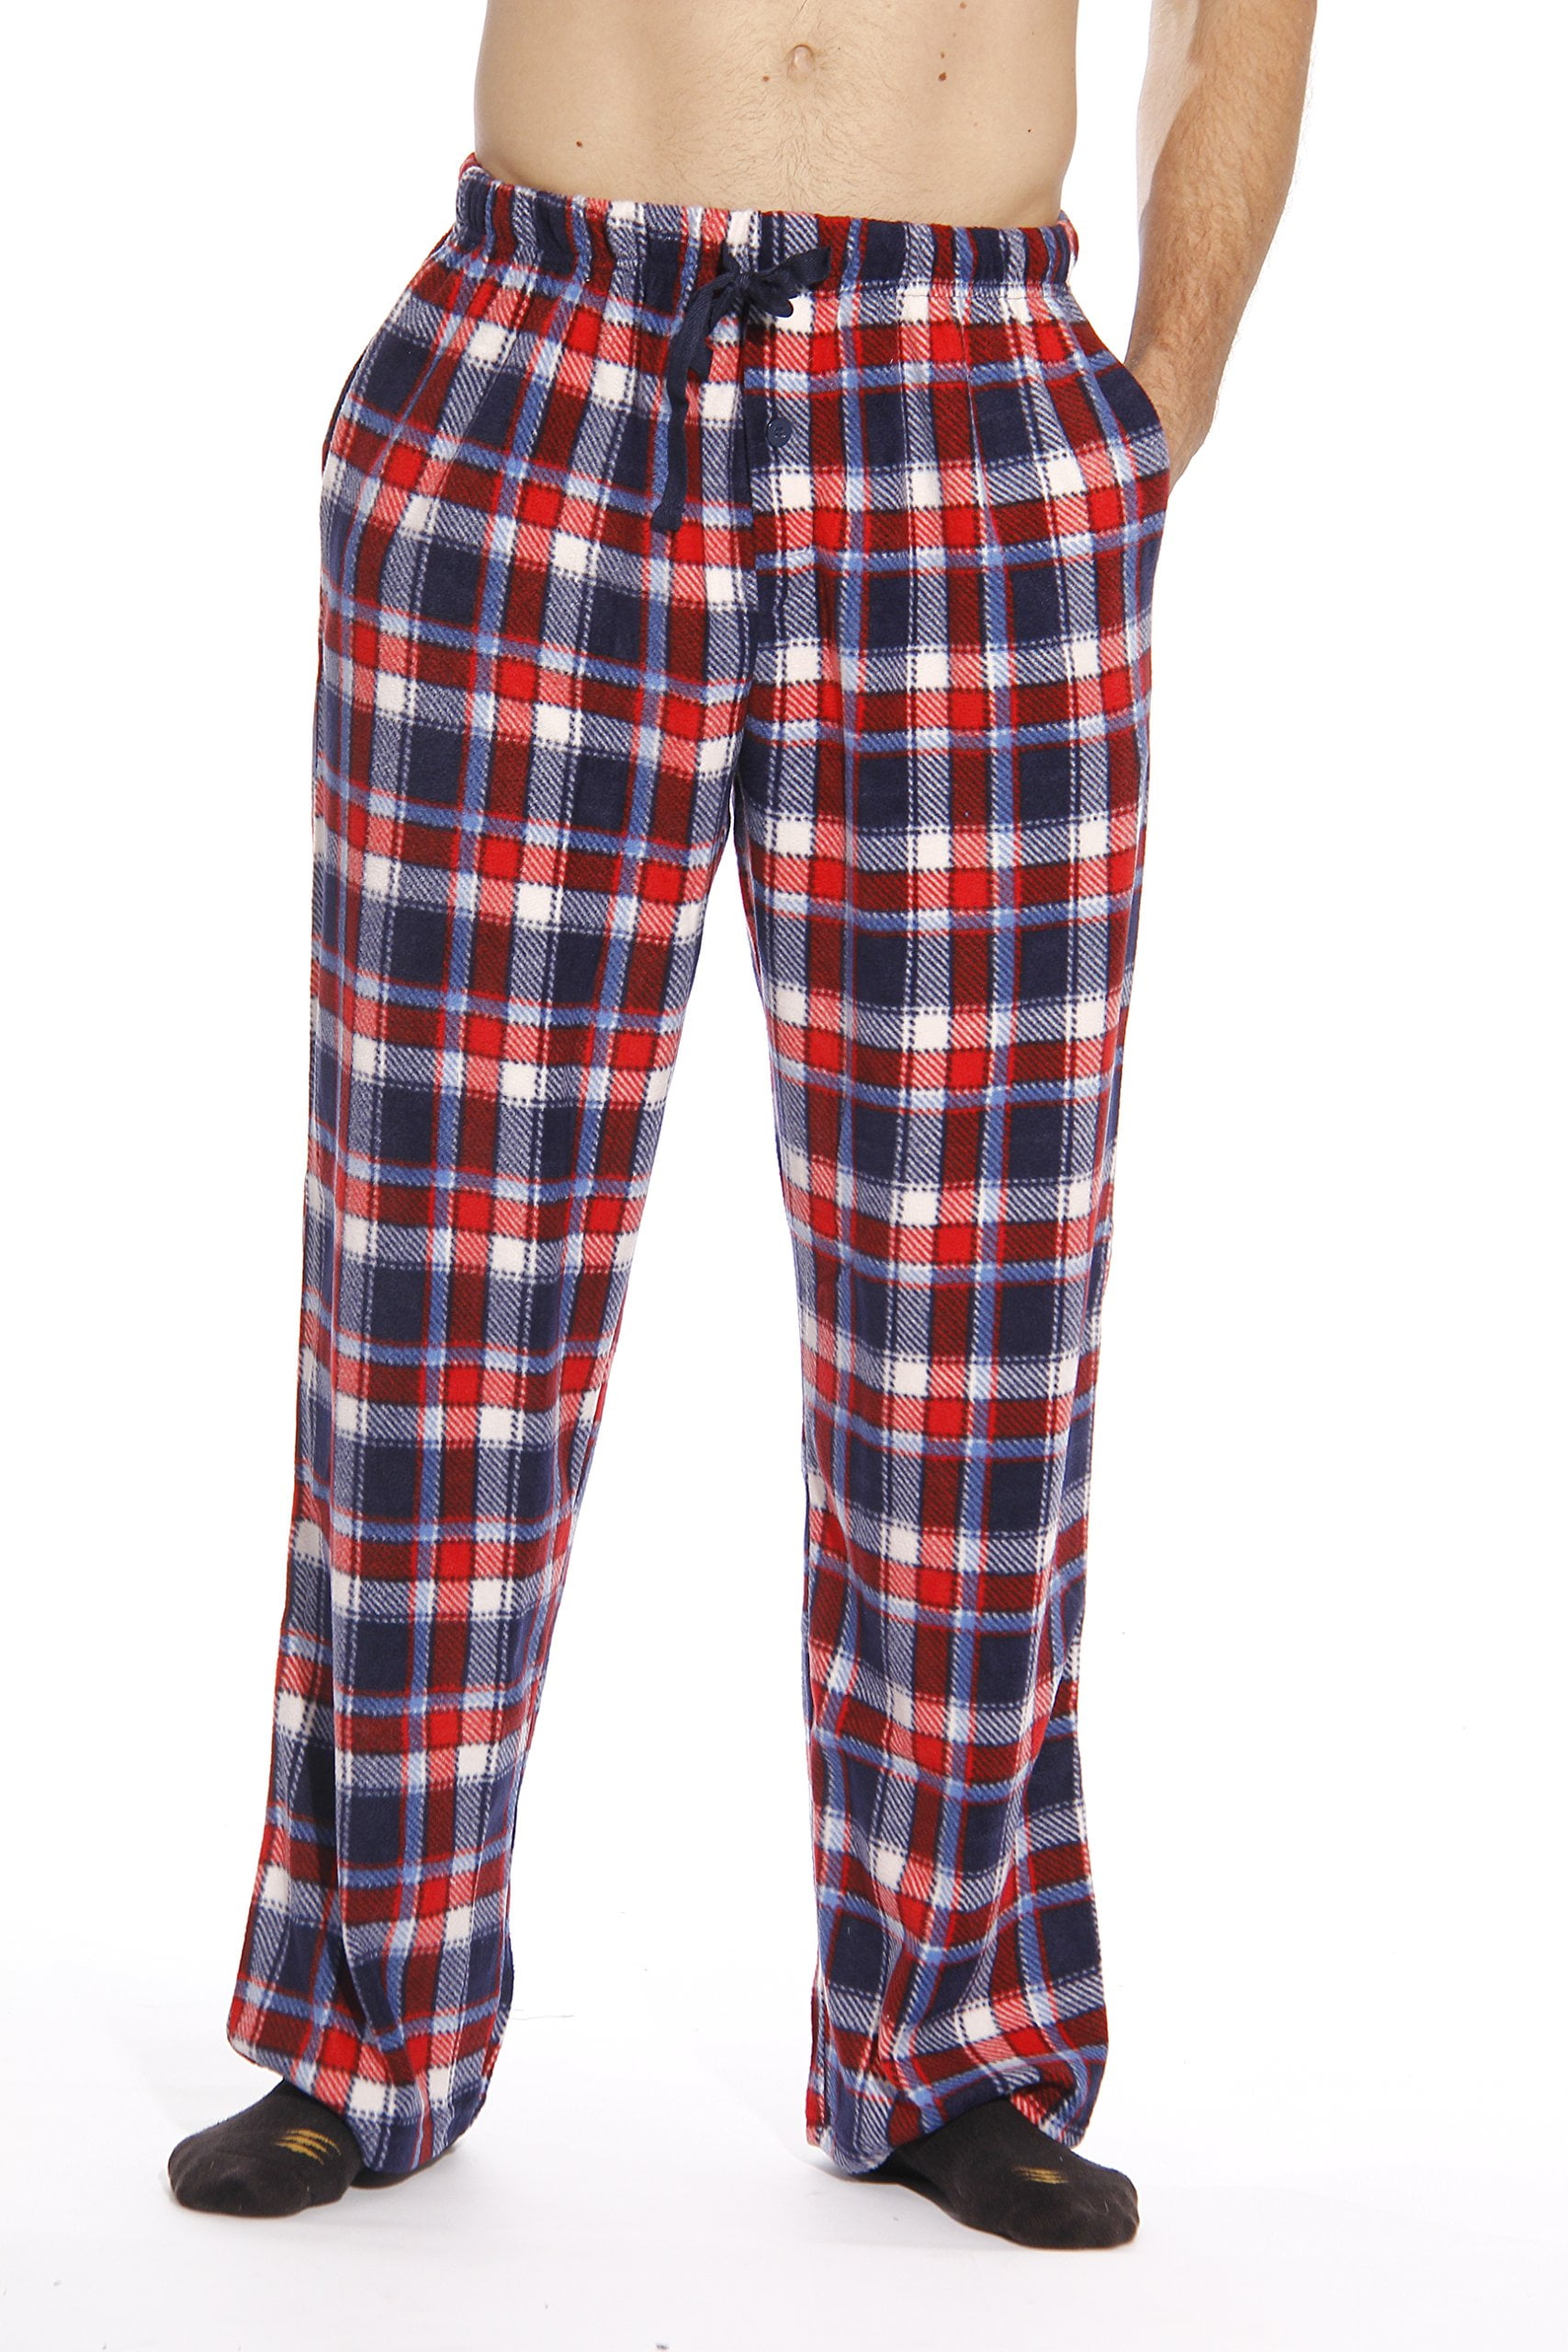 red white and blue plaid pants